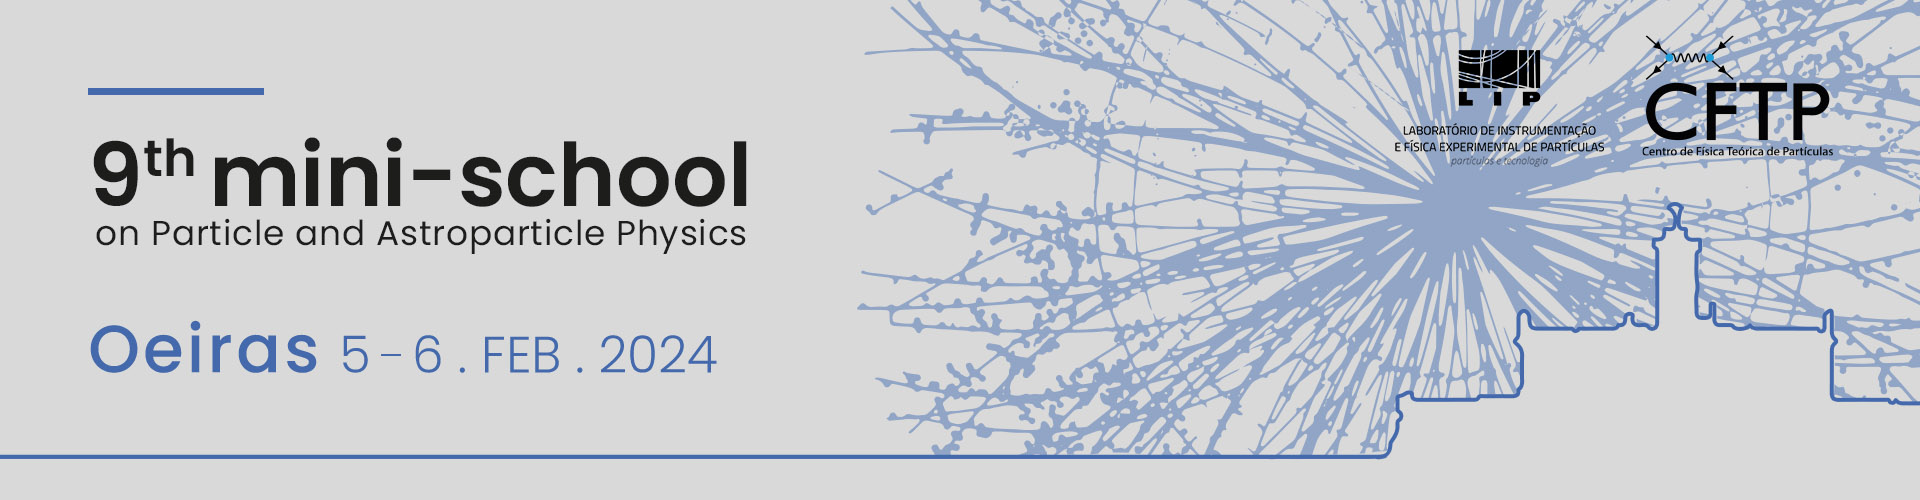 9th Mini-school on Particle and Astroparticle Physics